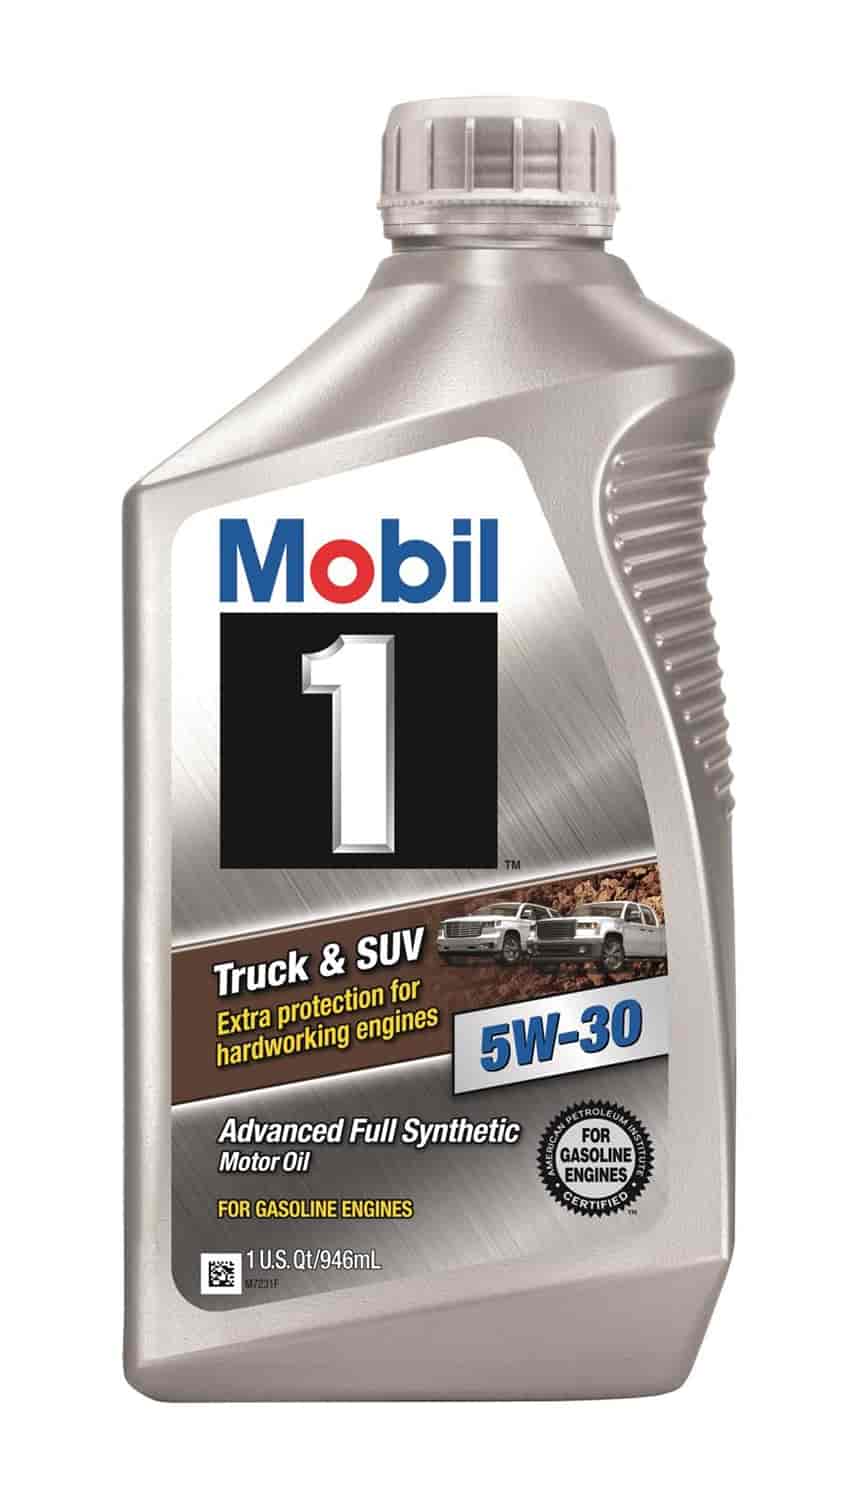 Extended Performance Engine Oil 5W30